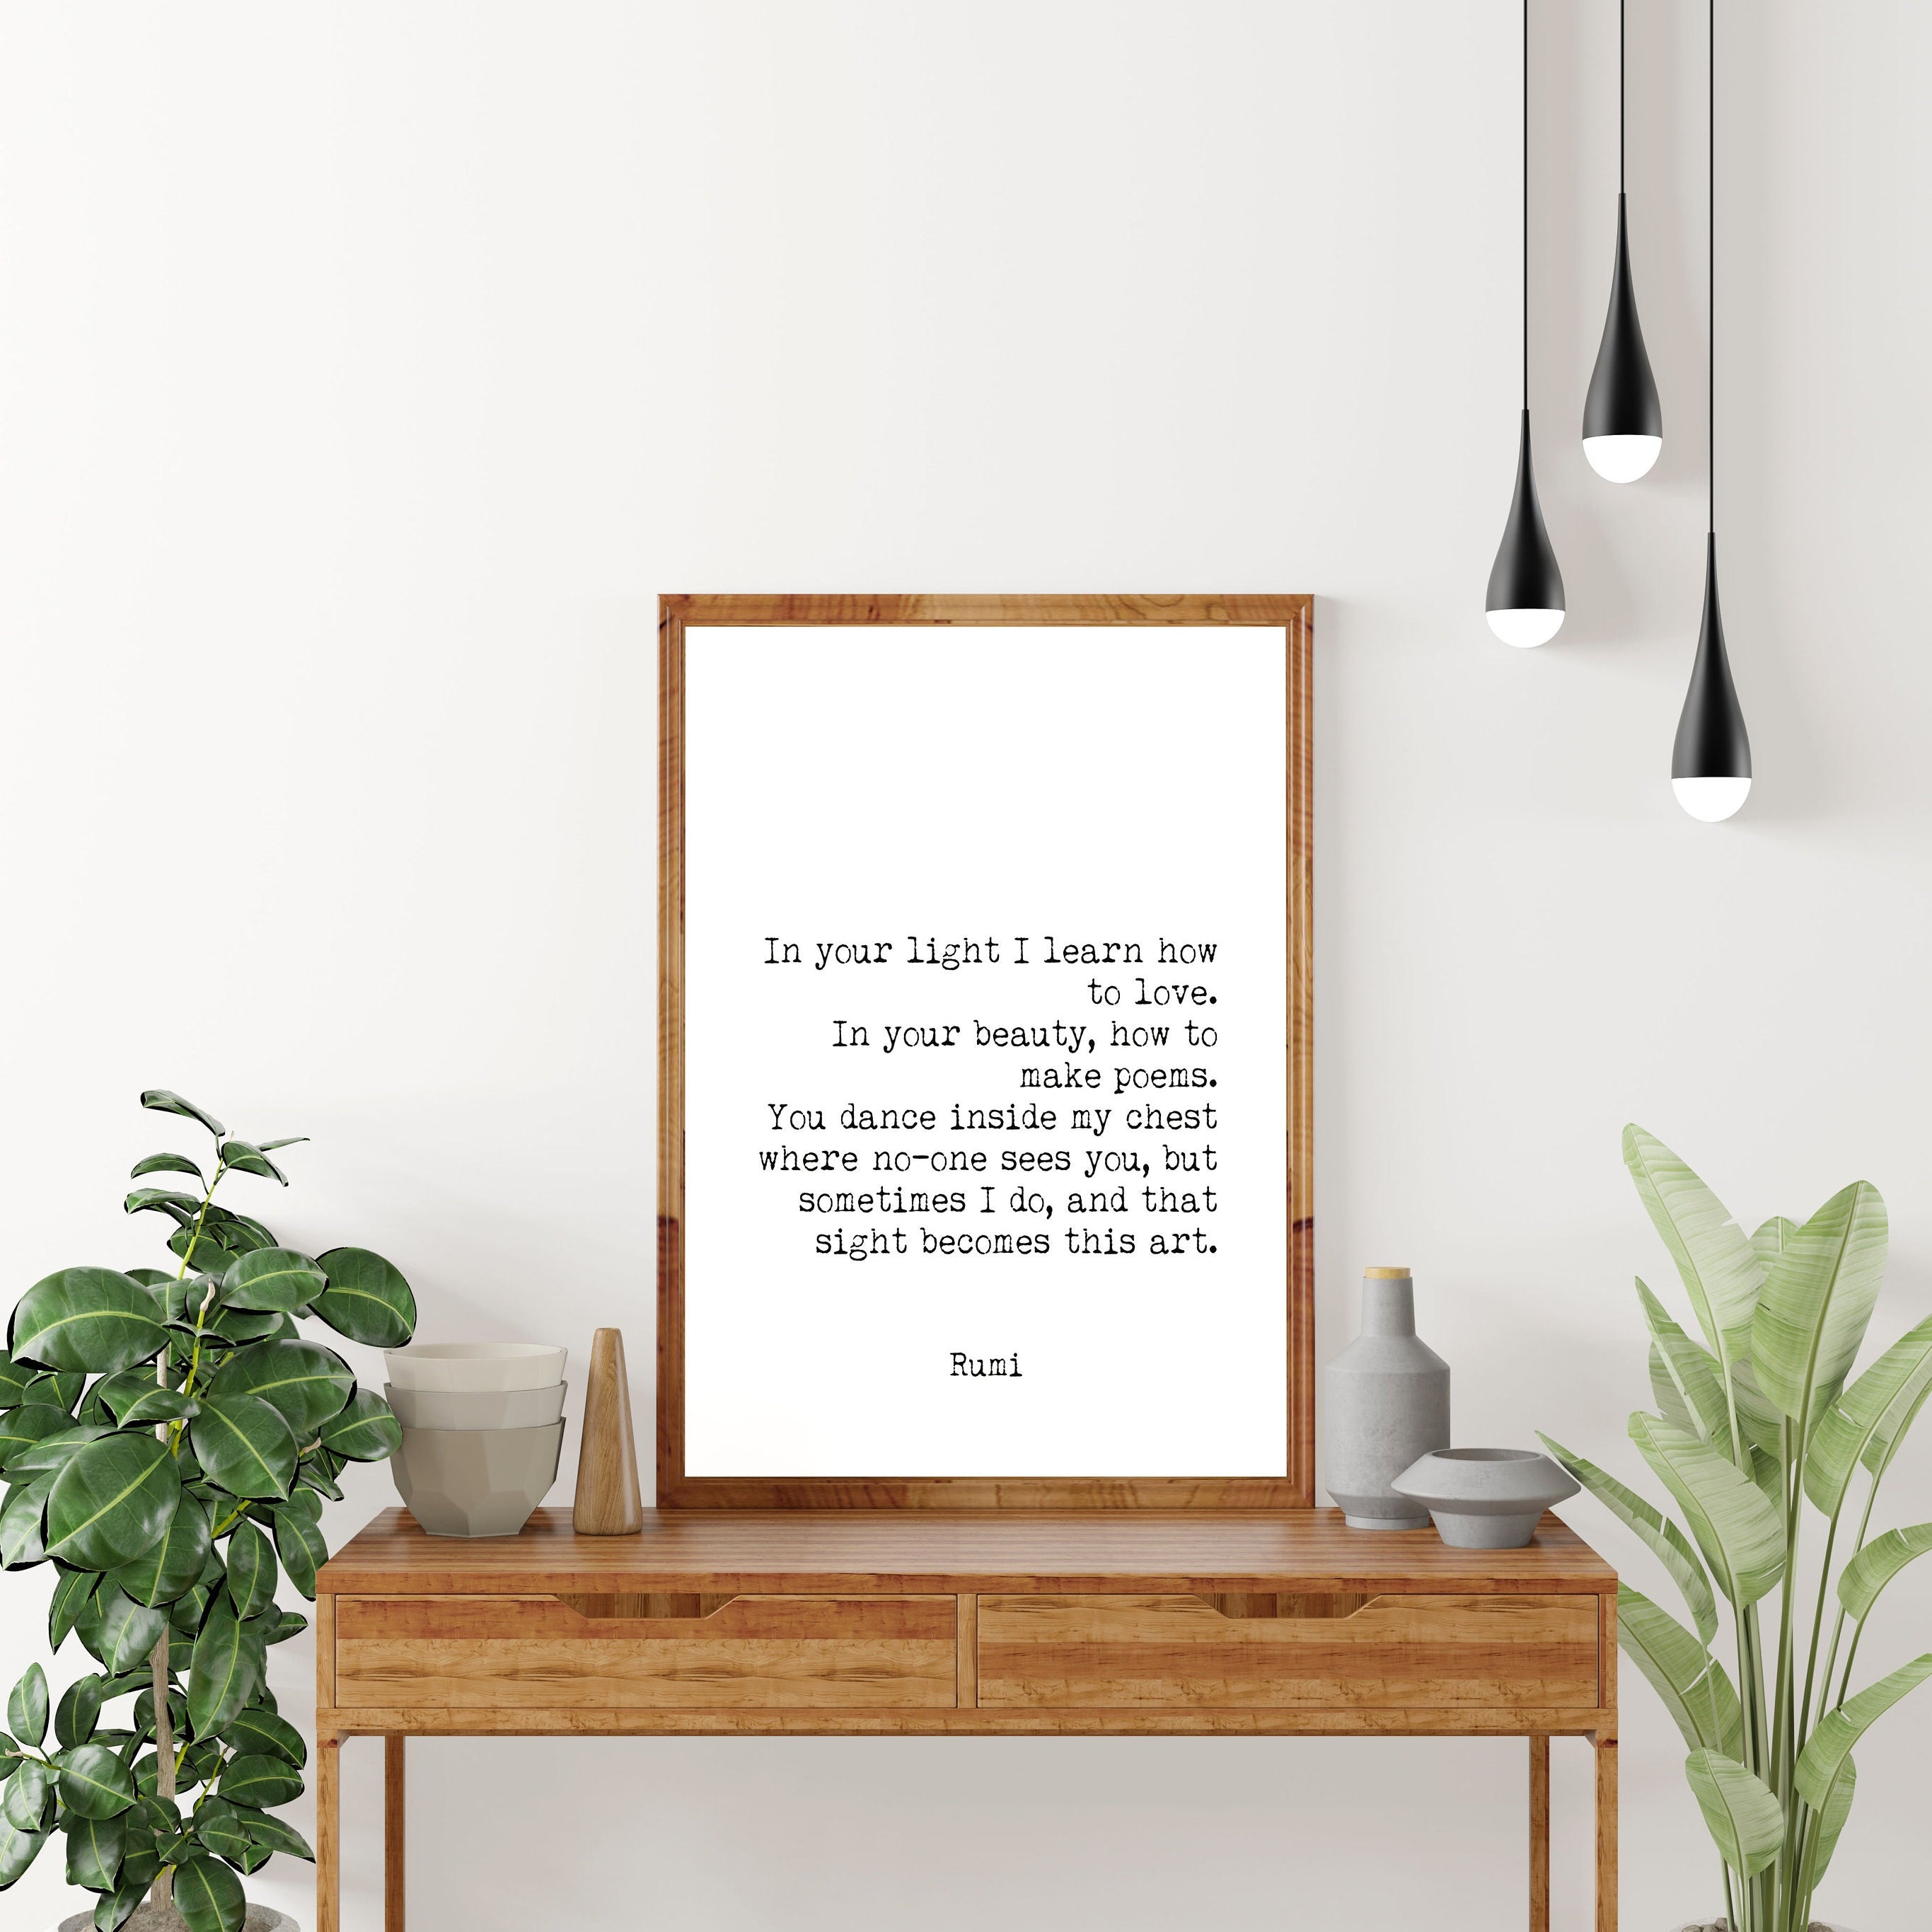 Rumi - In Your Light I Learn How To Love Wall Art Prints, Black & White Wall Decor, Unframed and Framed Art